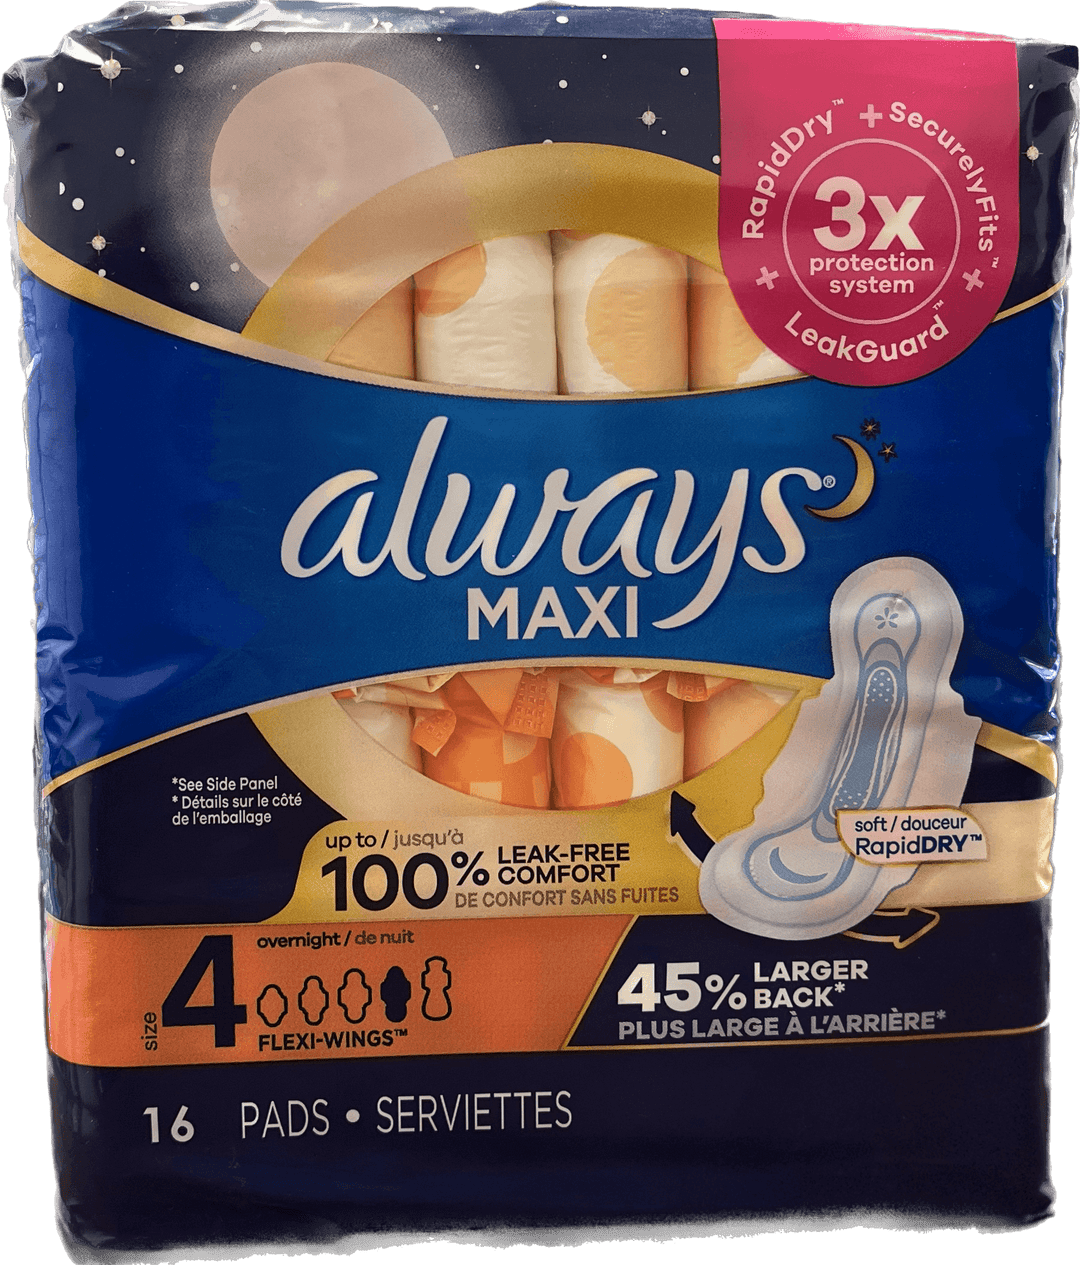 Always Infinity Feminine Pads with wings, Size 4, Overnight